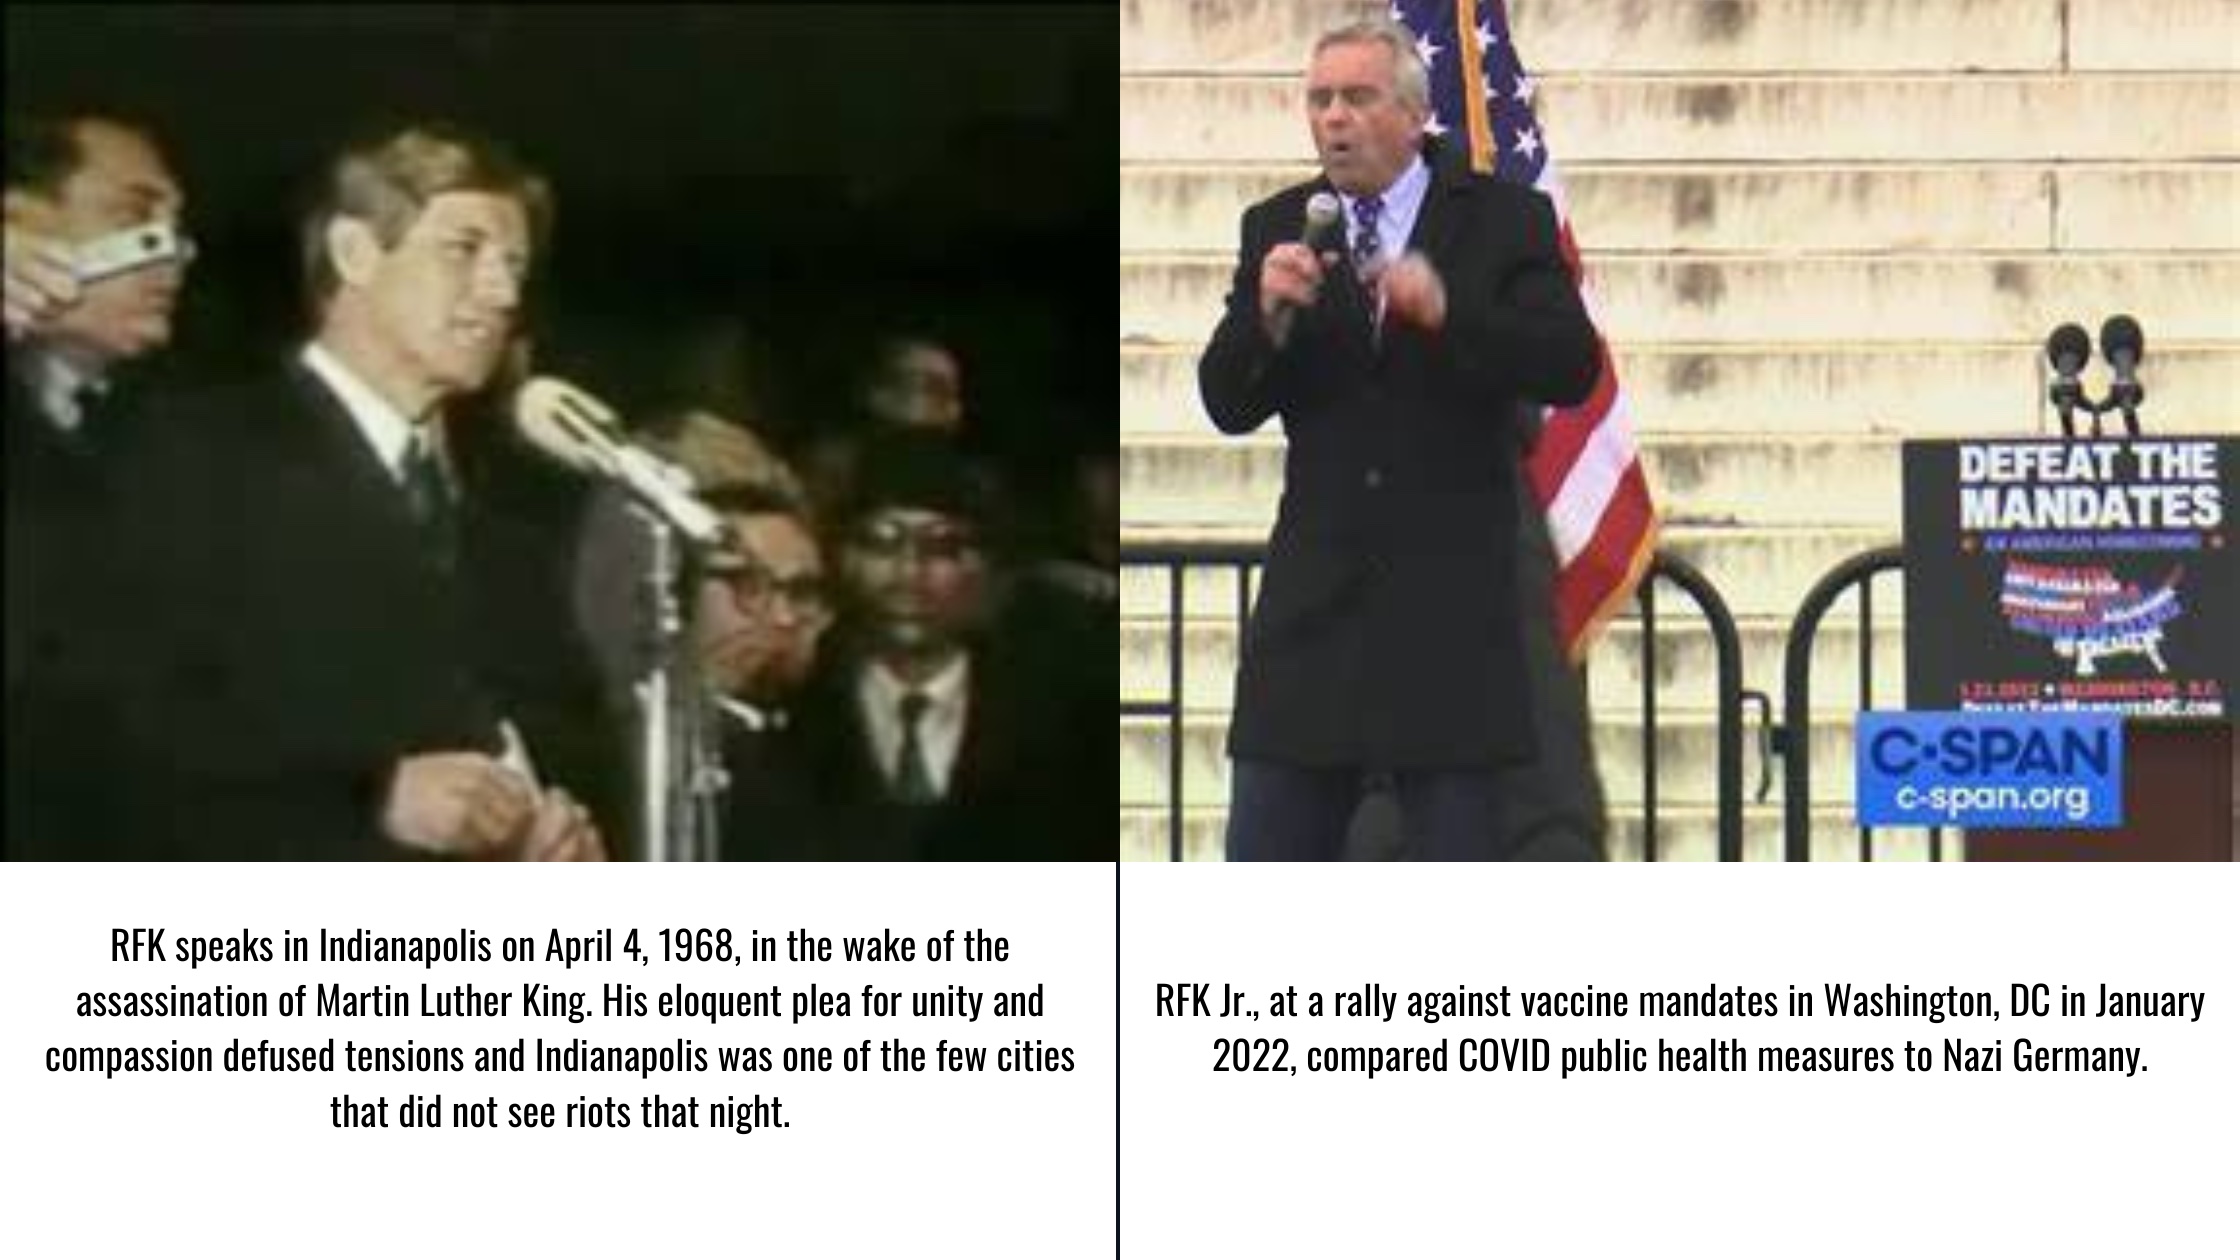 RFK speaks in Indianapolis on April 4, 1968, in the wake of the assassination of Martin Luther King. His eloquent plea for unity and compassion defused tensions and Indianapolis was one of the few cities that did not see riots that night. RFK Jr., at a rally against vaccine mandates in Washington, DC in January 2022, compared COVID public health measures to Nazi Germany.